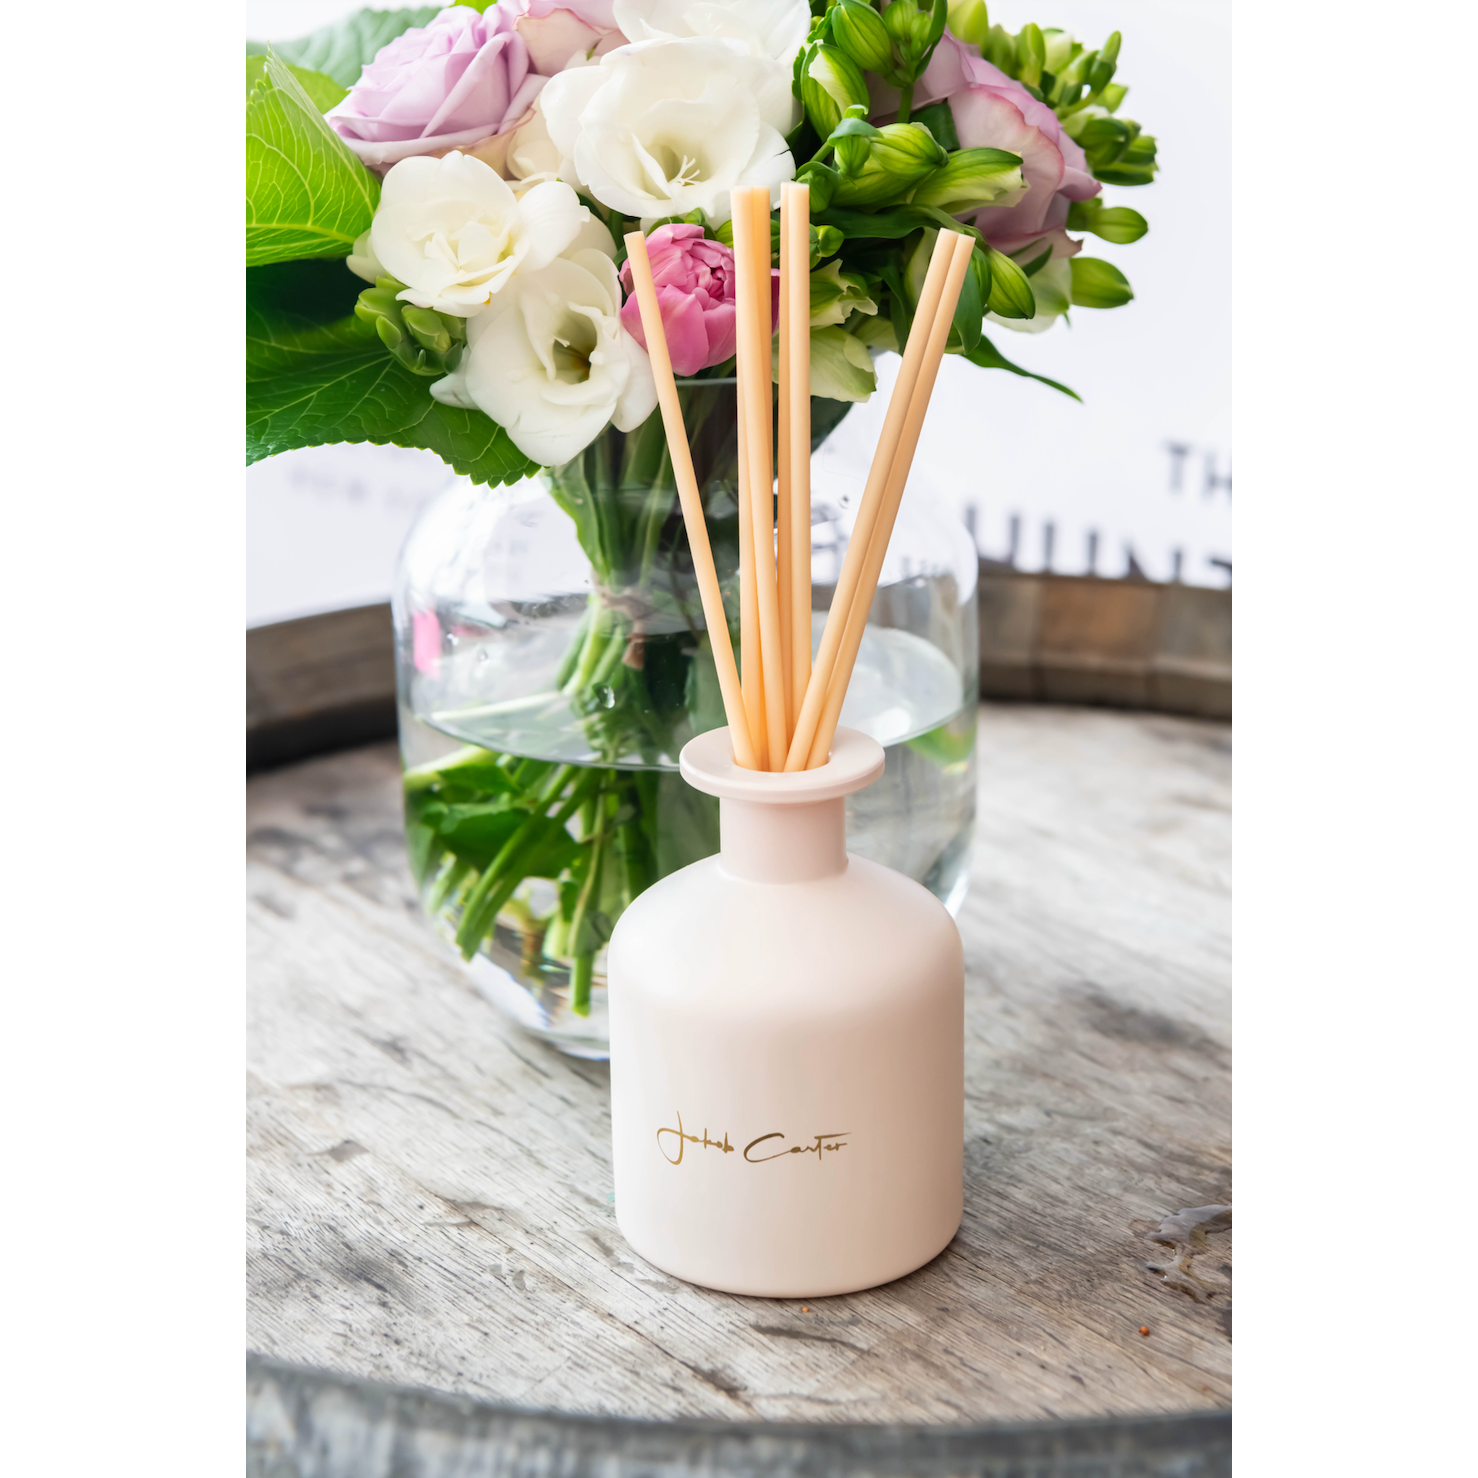 PARTY IN PARIS TRIPLE SCENTED REED DIFFUSER